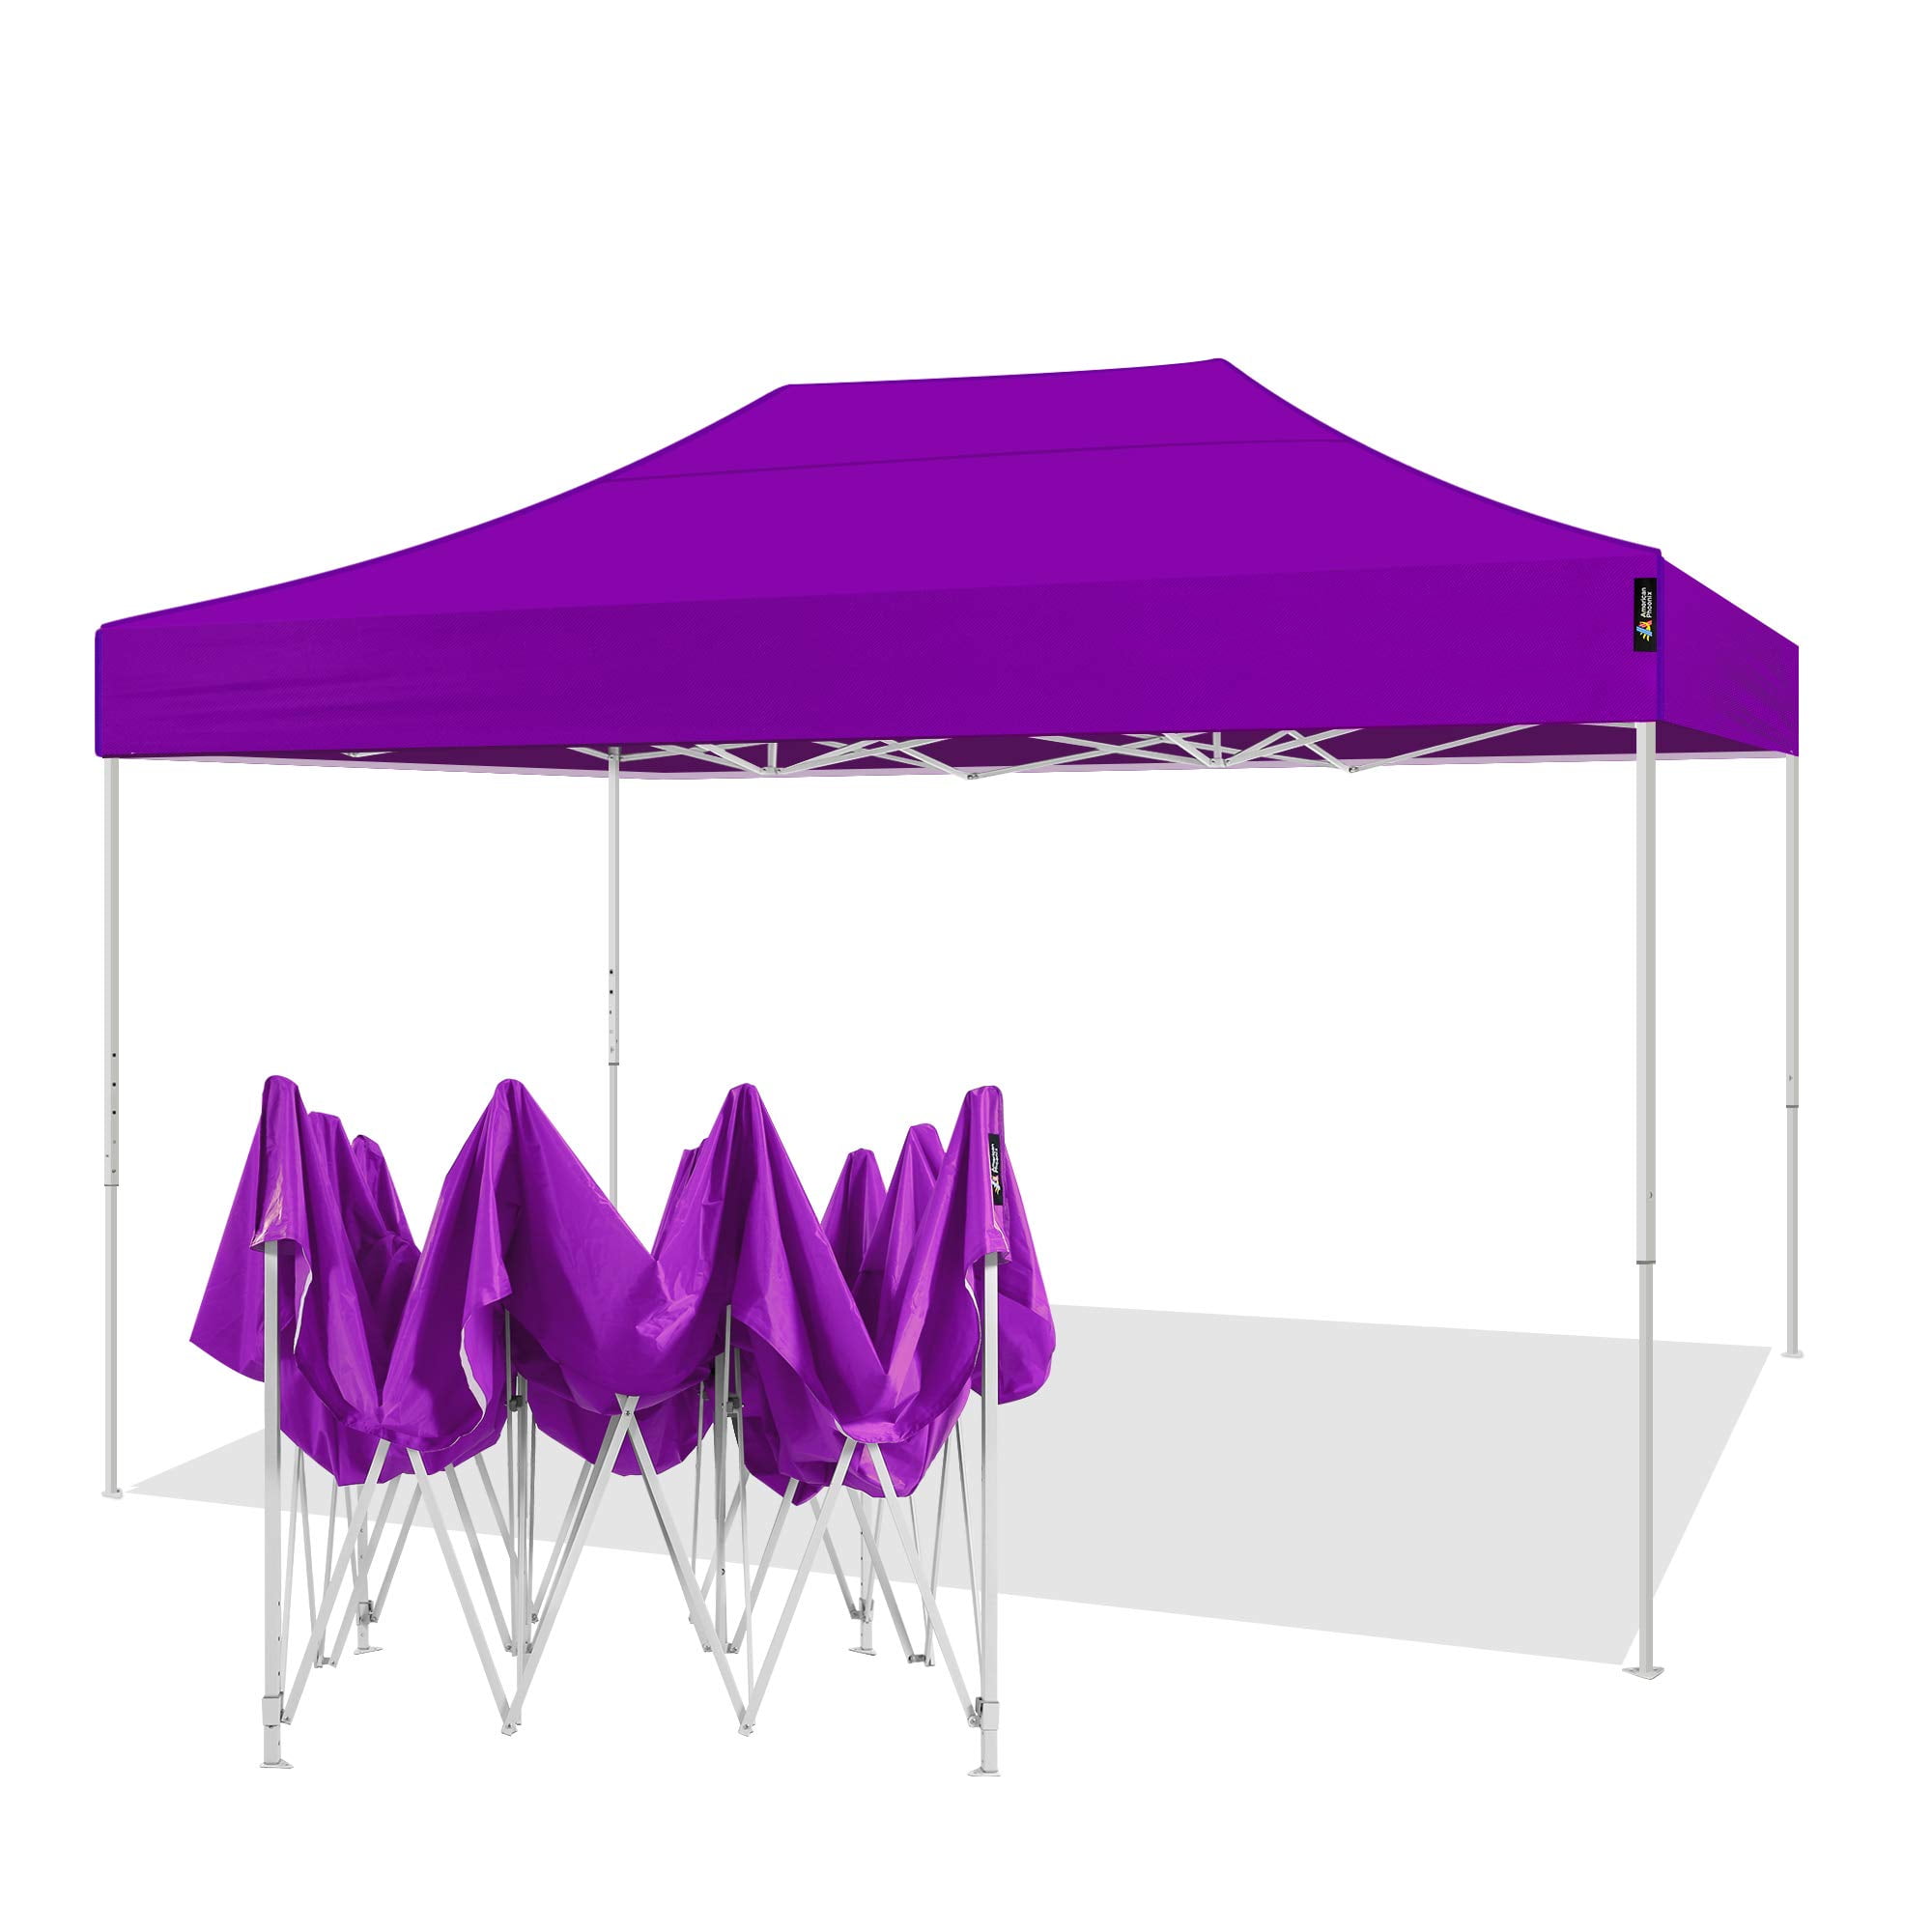 Canopy 10x10 10X20 10x15 5x5  Shelter Car Shelter Wedding EasyPop Up Tent 